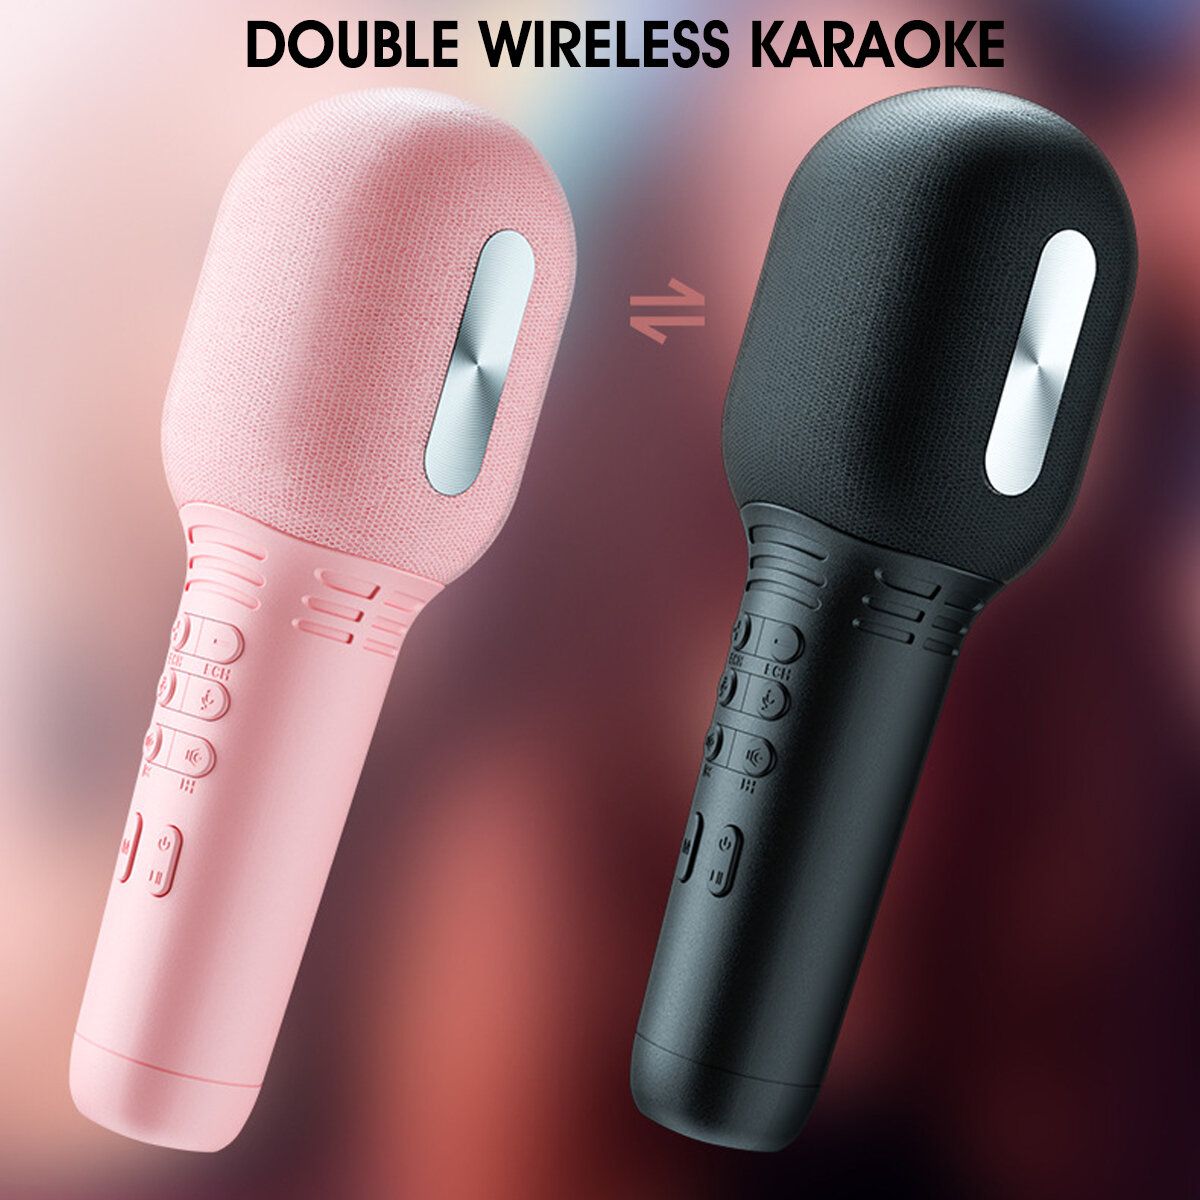 Wireless Microphone bluetooth V5.0 Low Latency 1800mAh Battery Portable Audio Video Recording Mic for Live KTV Fun COD